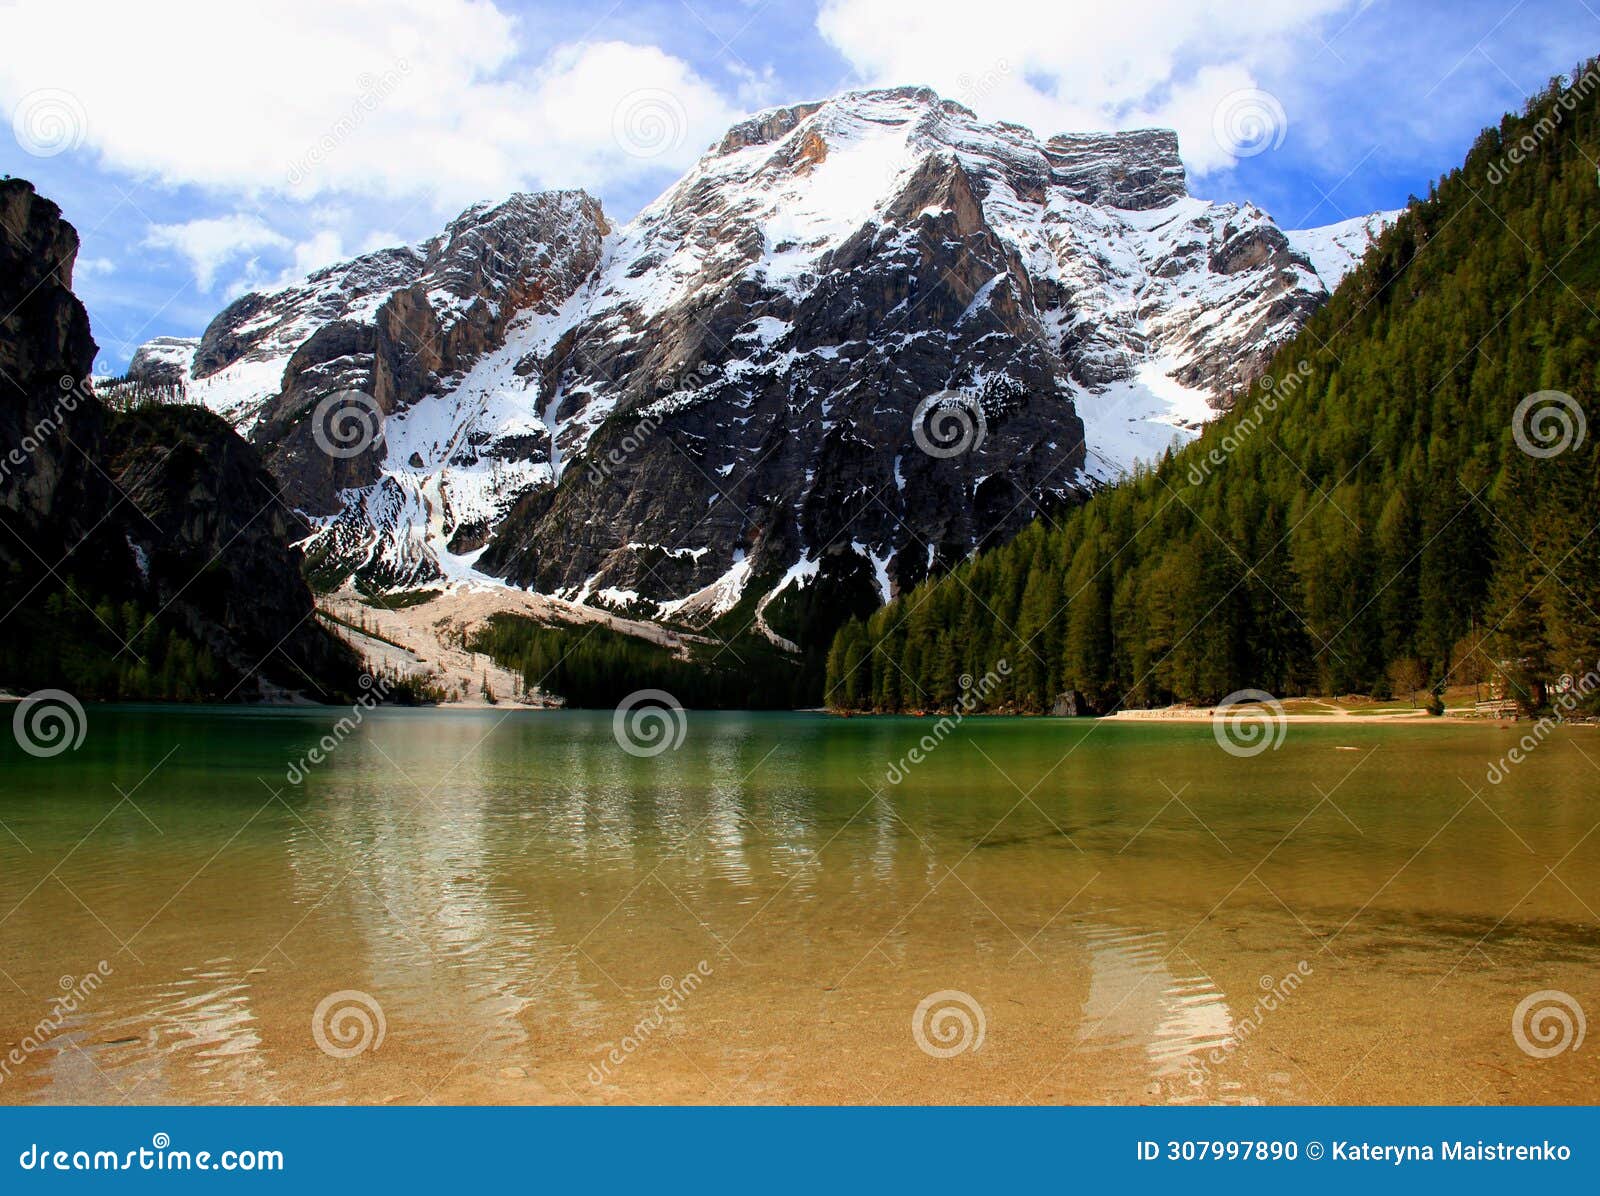 landscape with the emerald surface of lago di braies lake and snowcapped mountains in the dolomites, italy